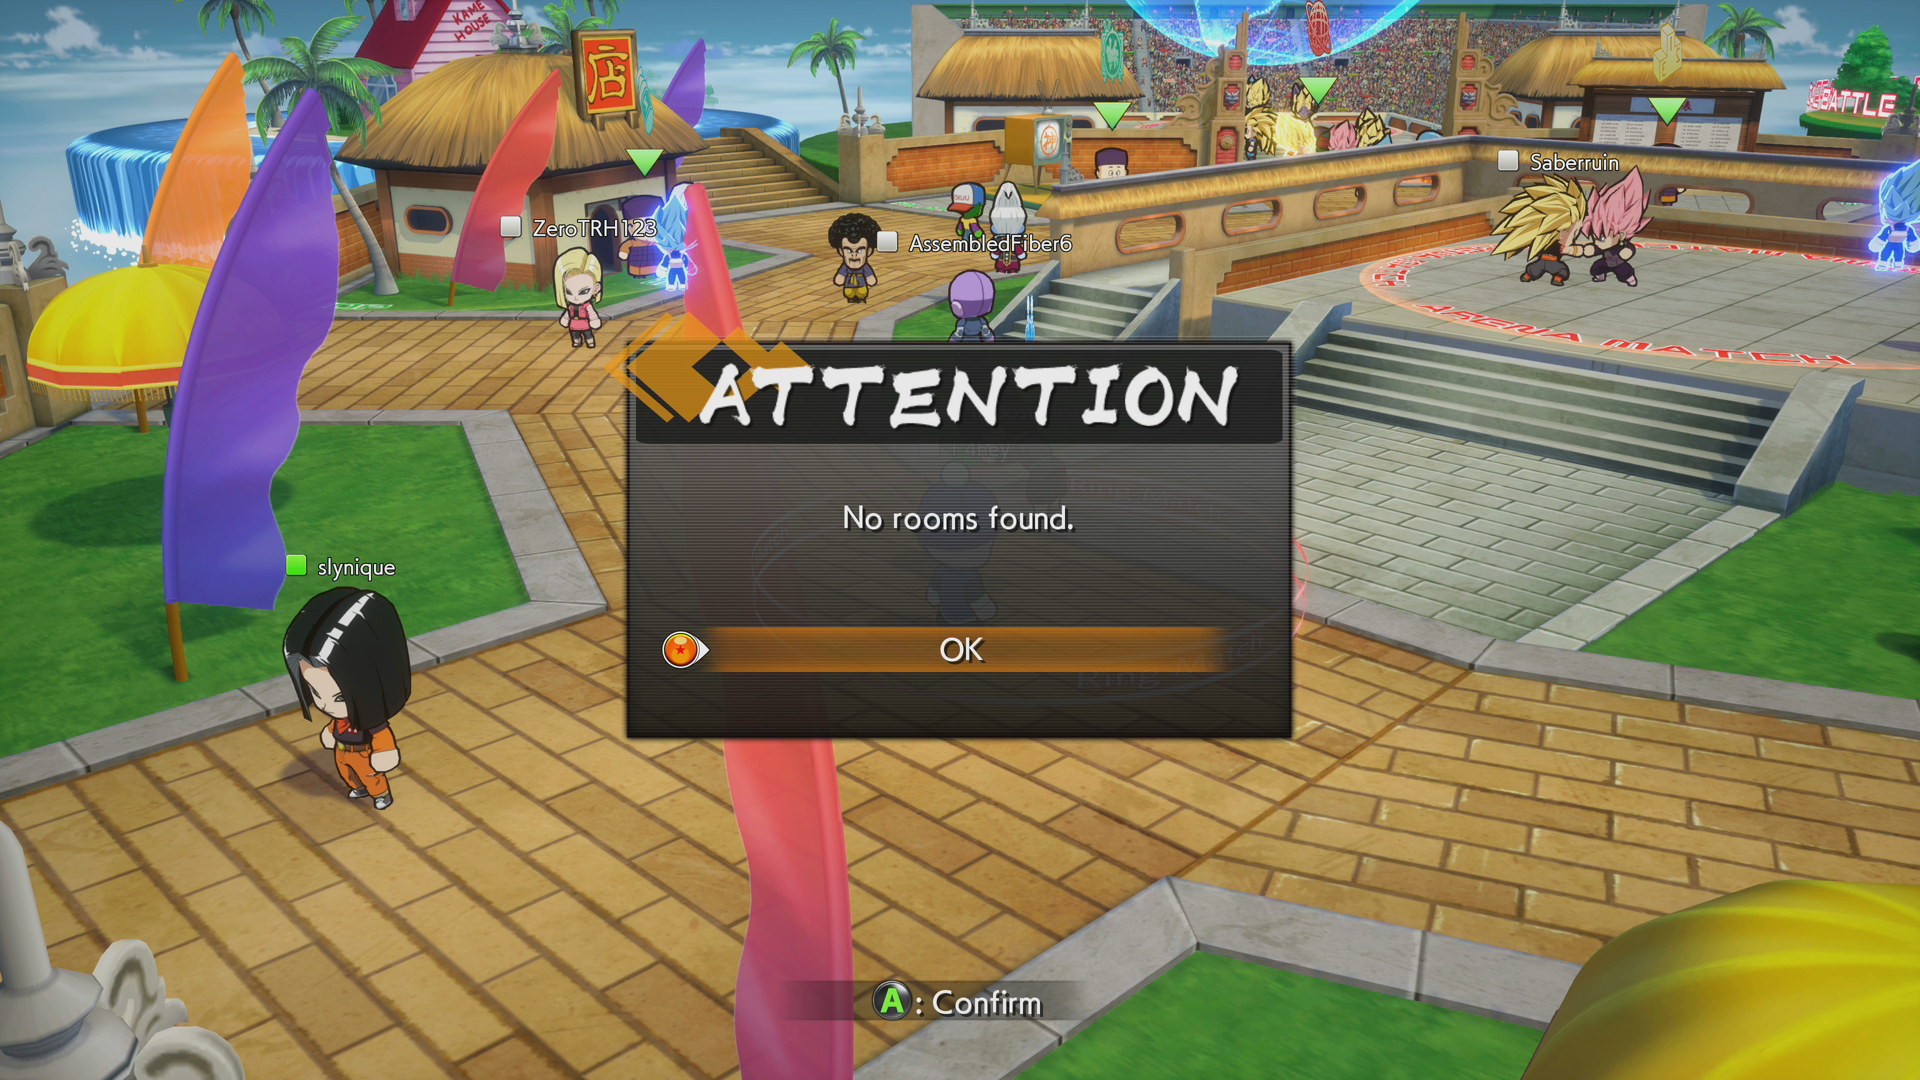 Dragon Ball FighterZ’s Lobby System Is A Huge Hassle